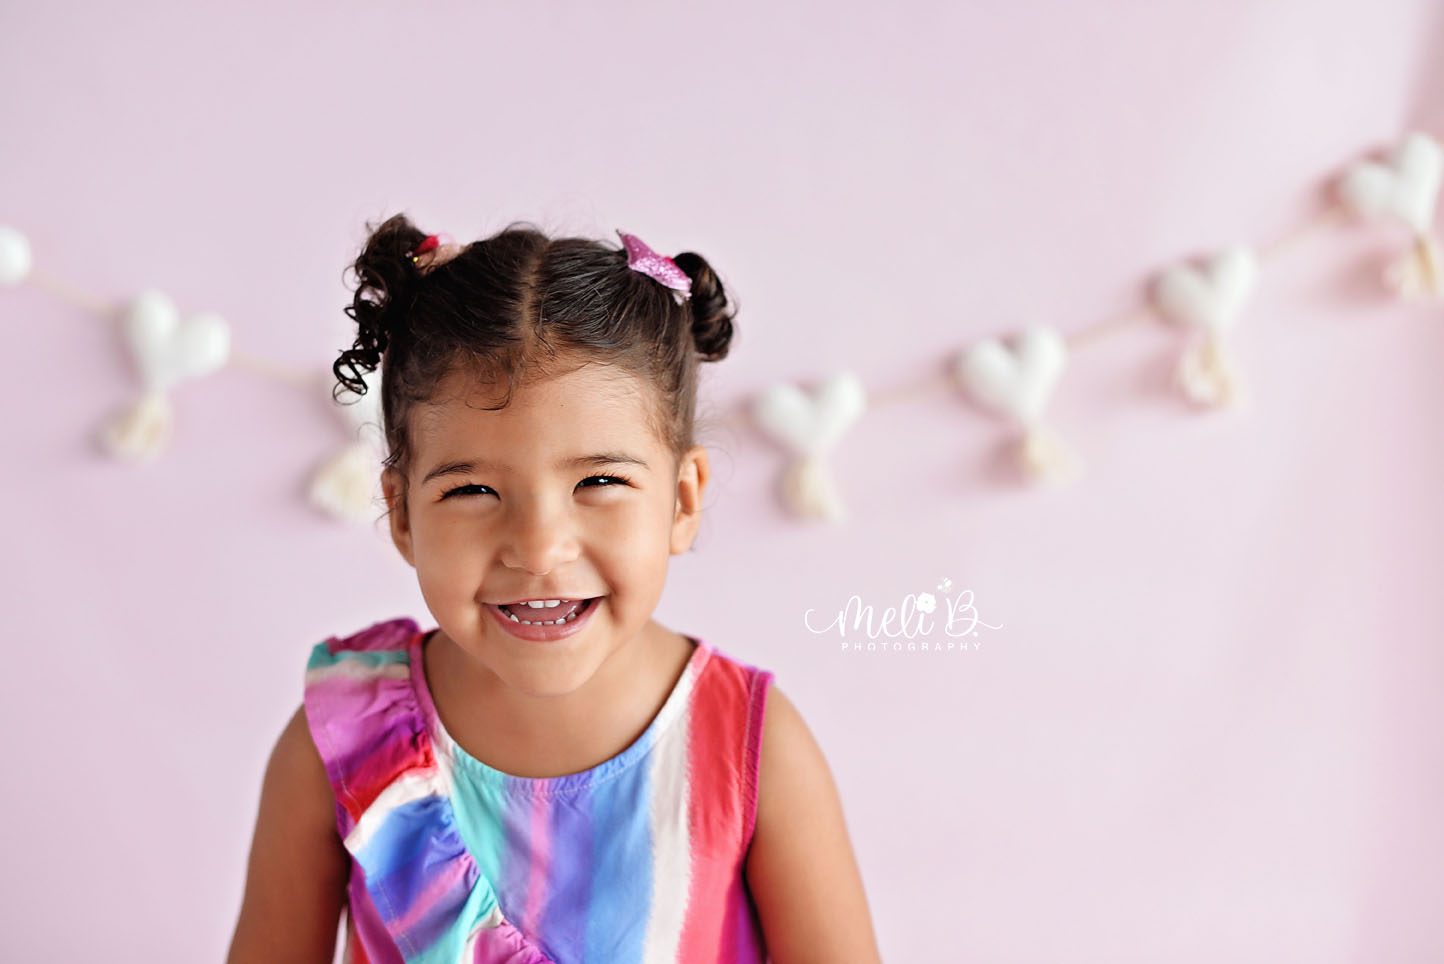 A toddler girl in photo session smiling naturally at camera